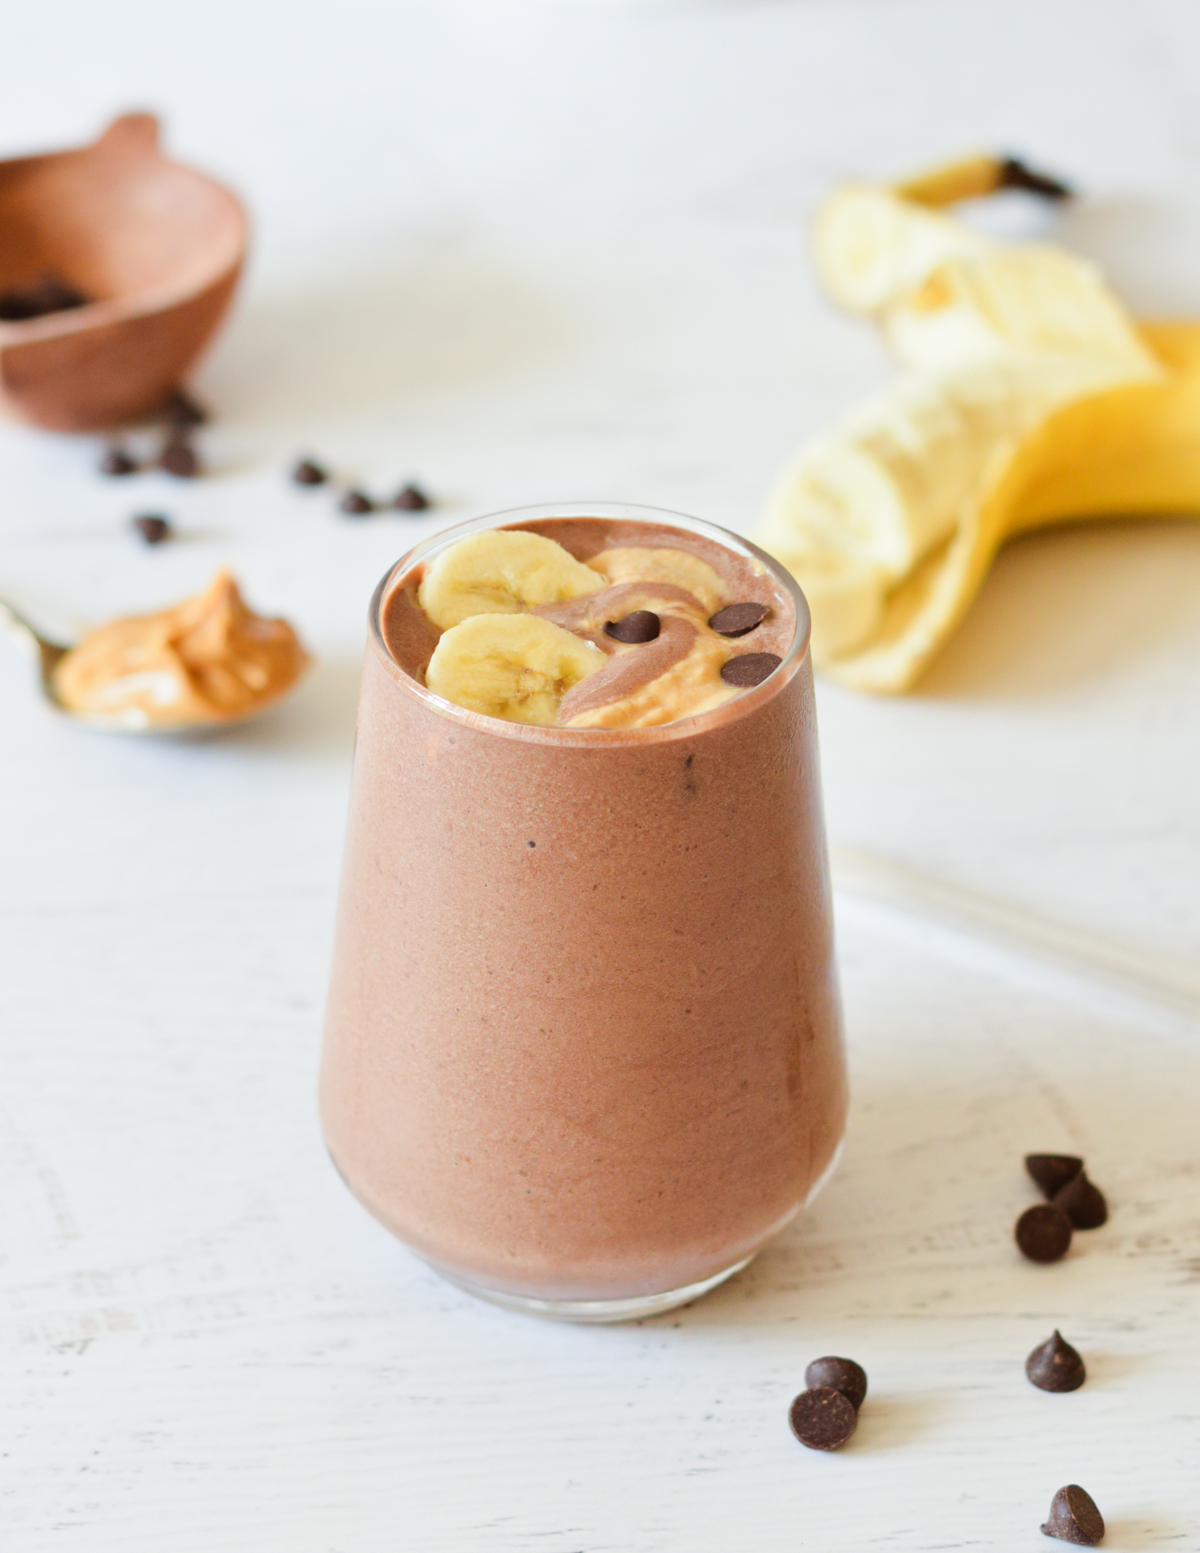 chocolate smoothie with bananas and chocolate chips on top.